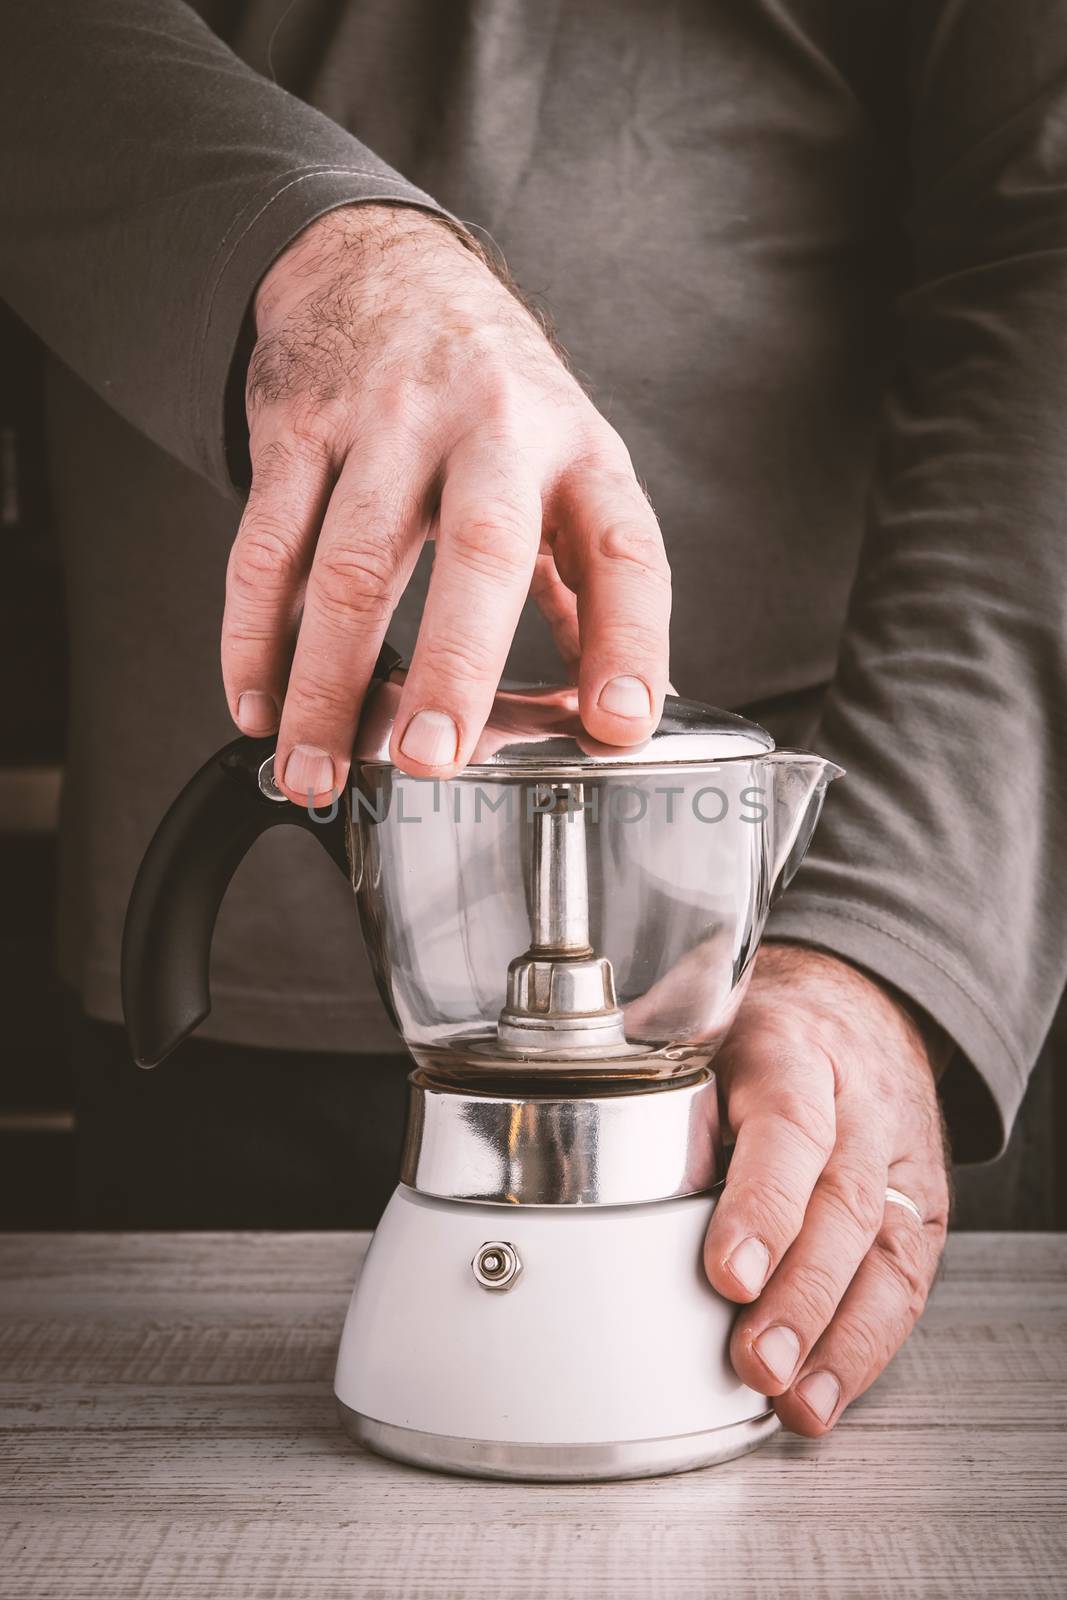 Hands with coffee maker